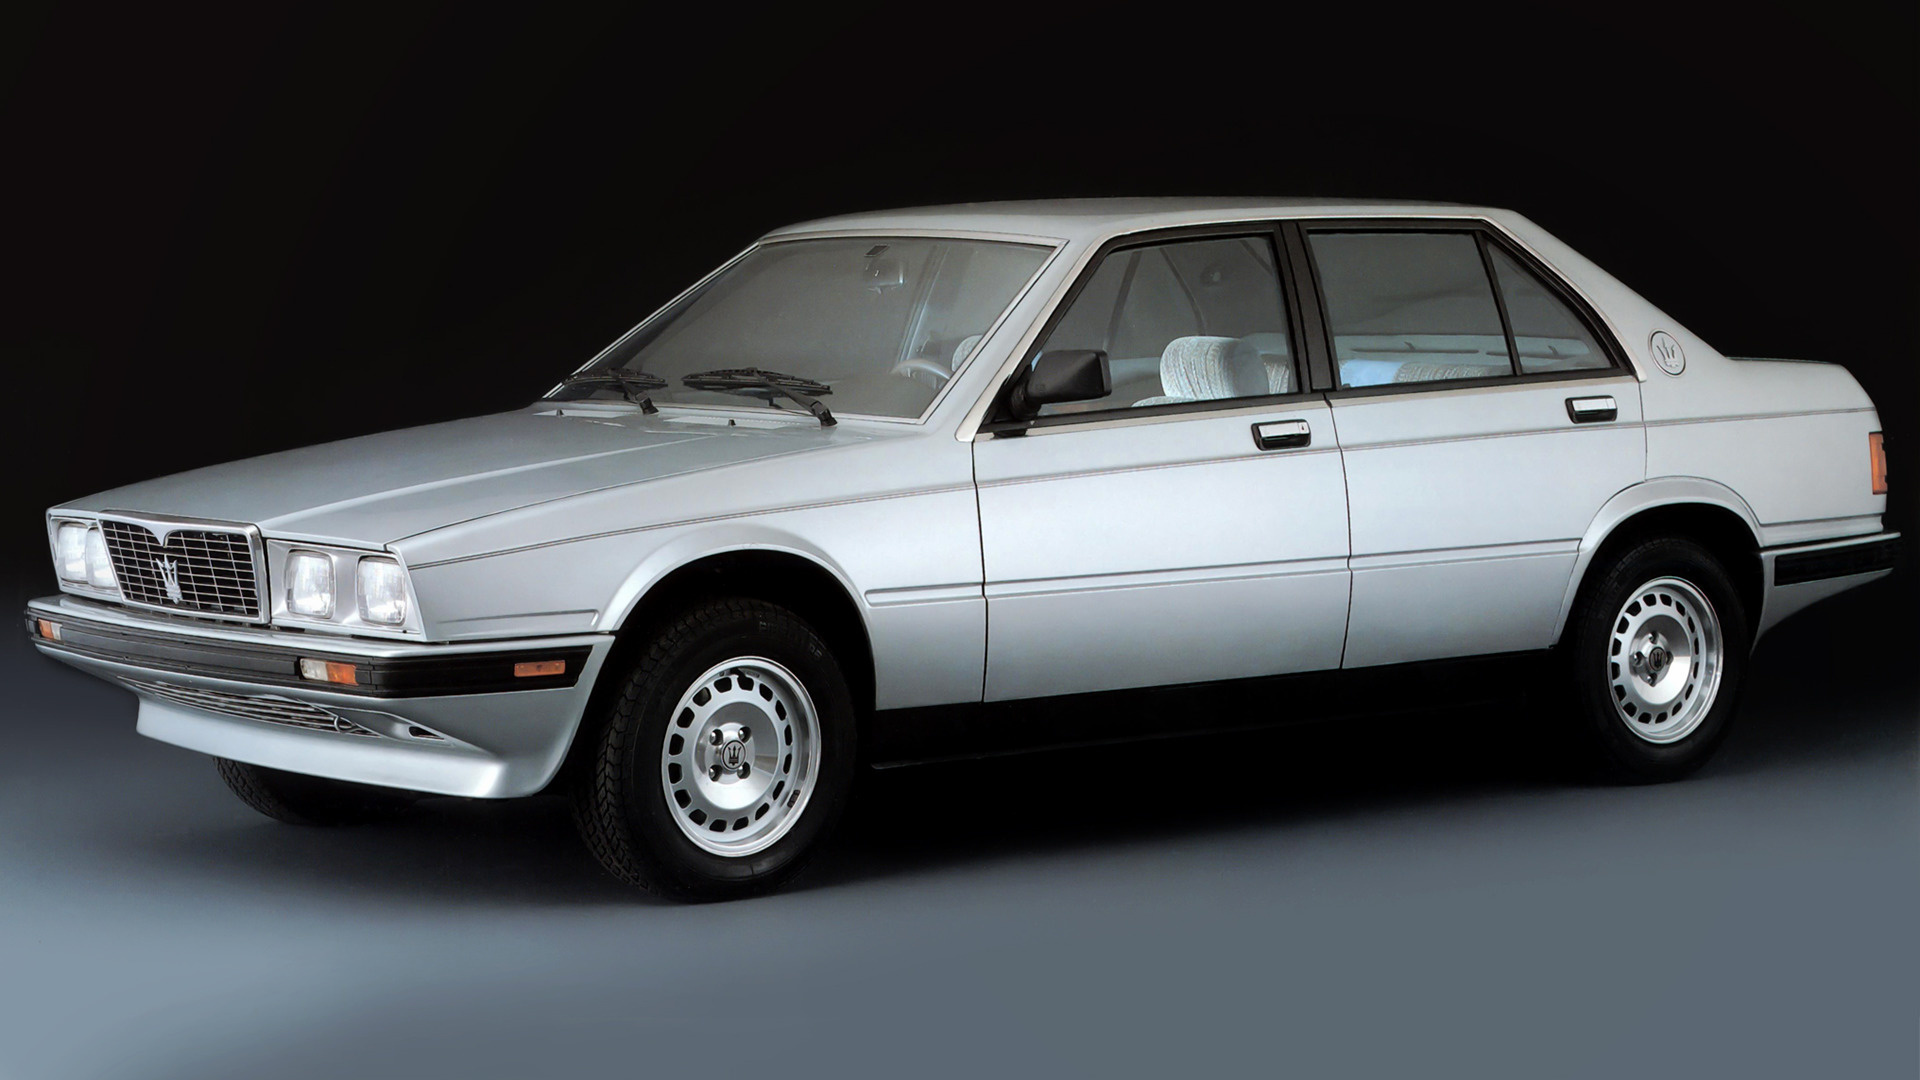 1983 Maserati 425 - Wallpapers and HD Images | Car Pixel